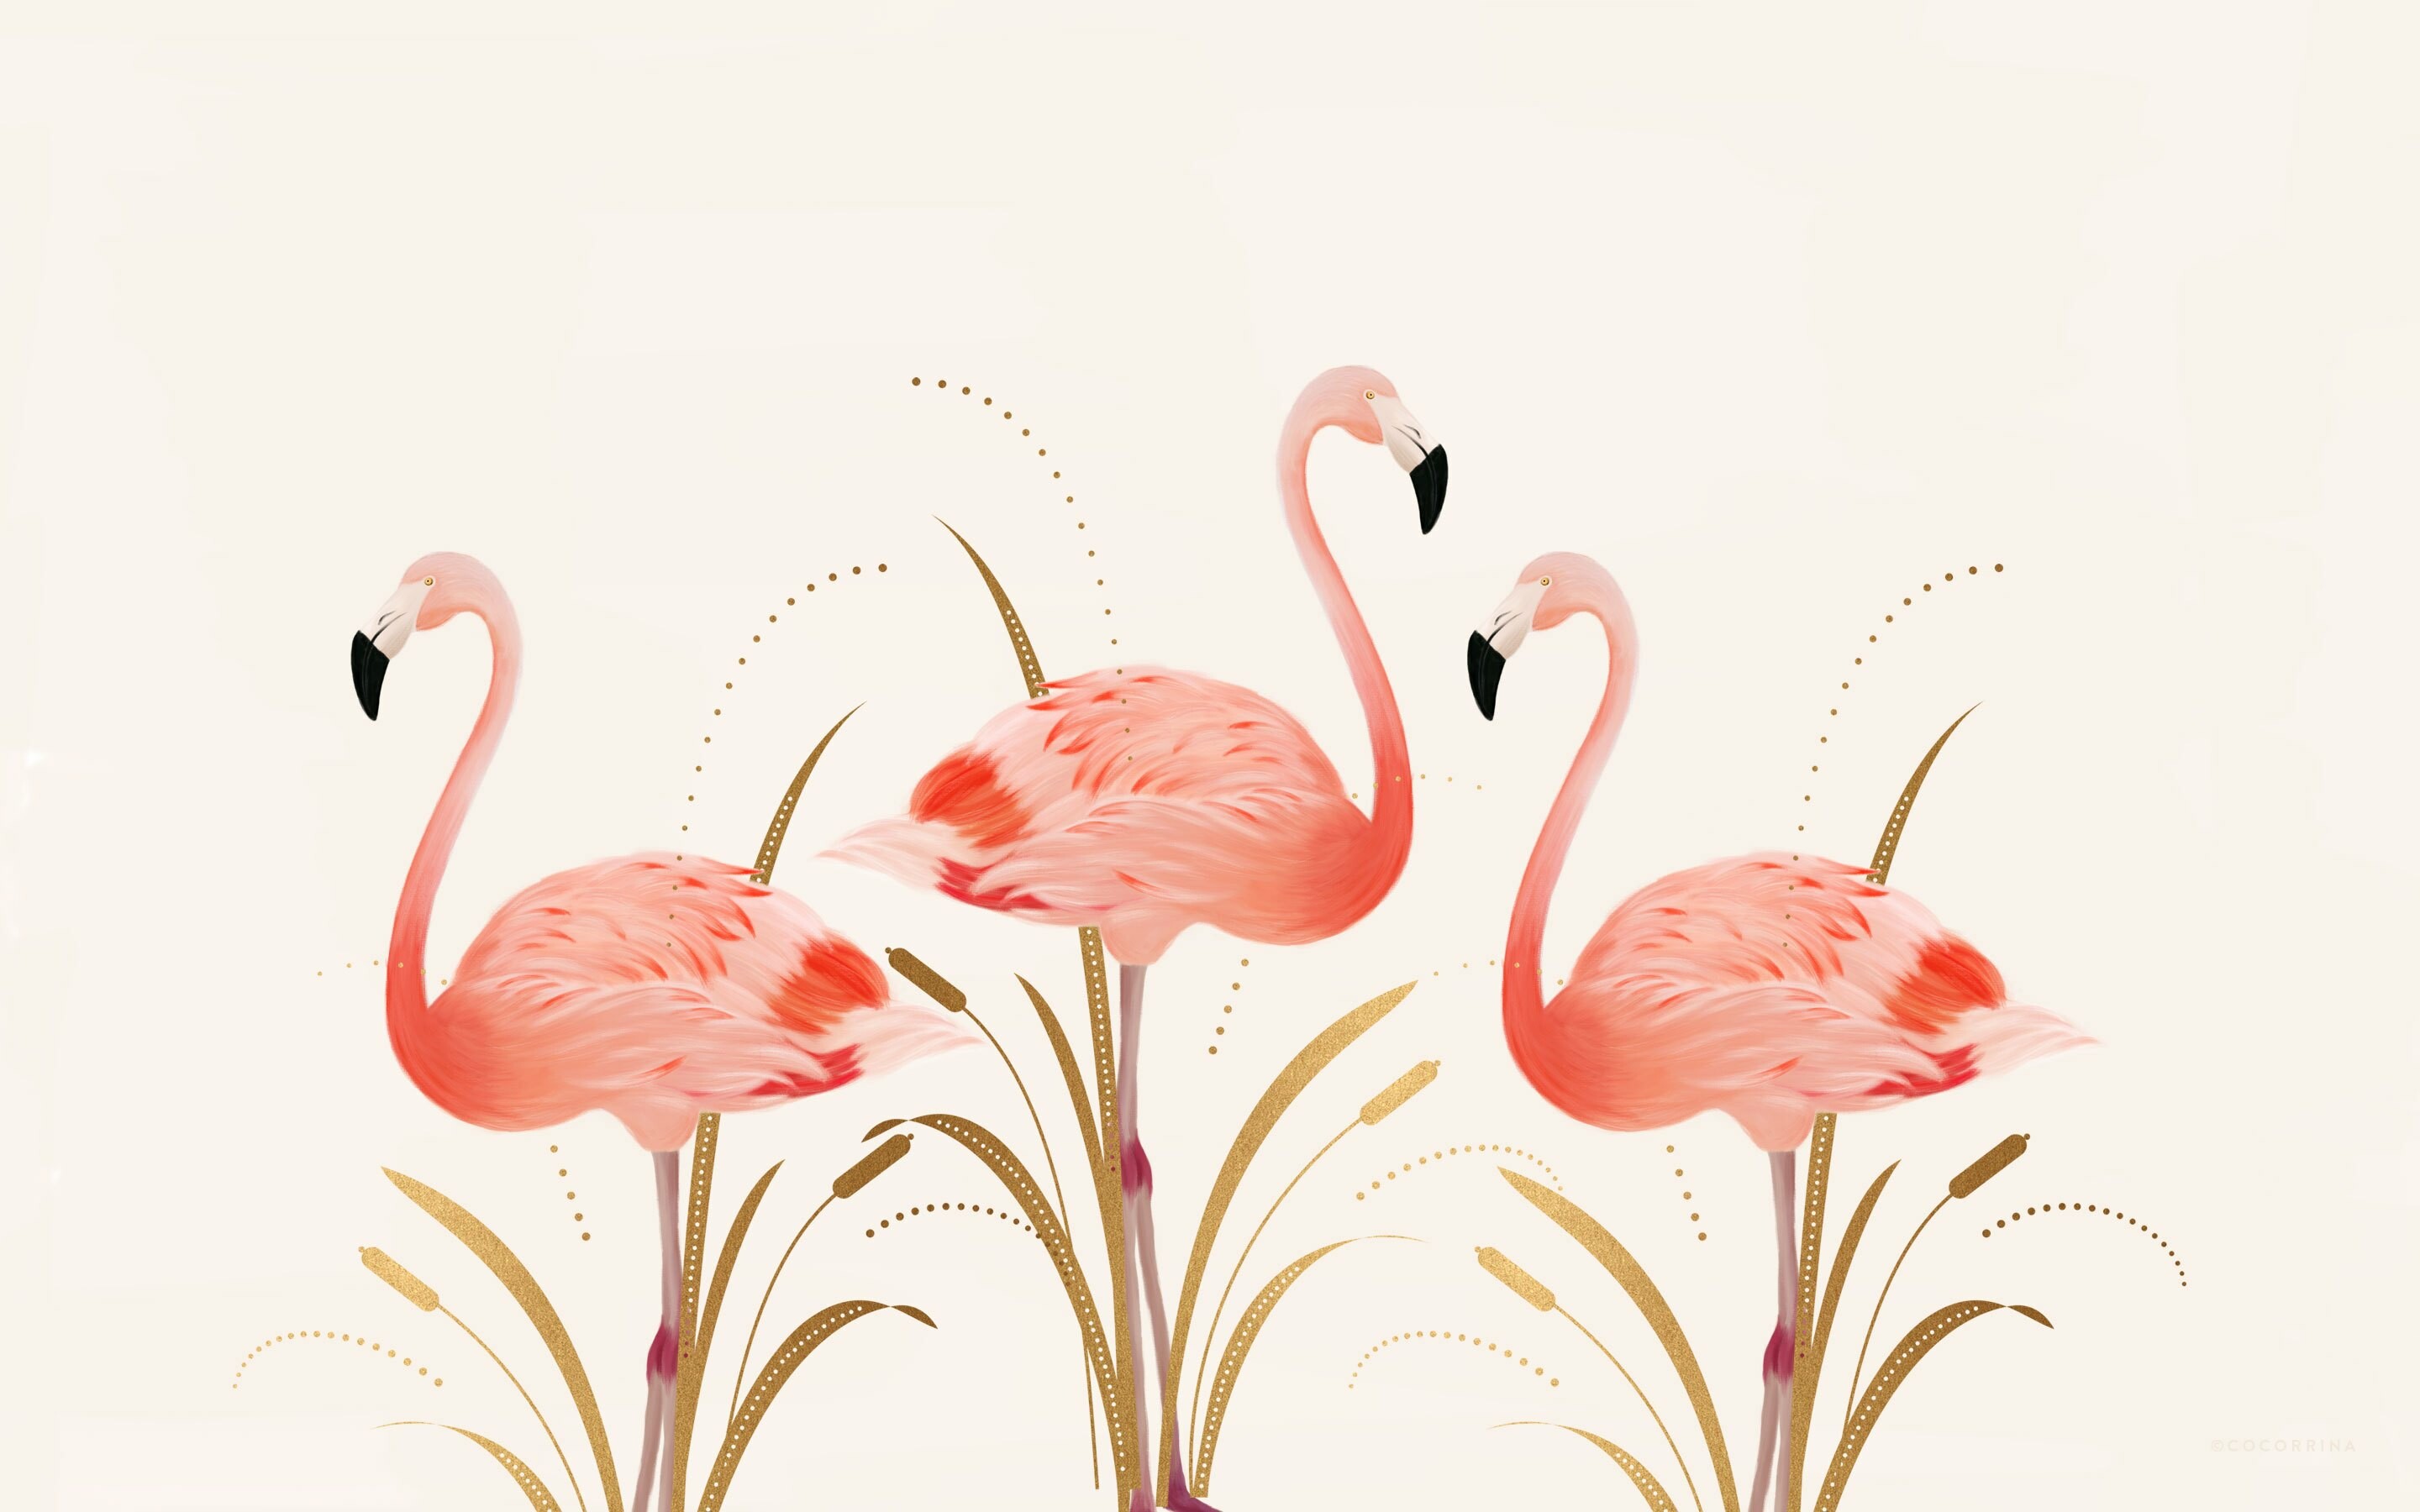 Flamingo: Large birds that are identifiable by their long necks, sticklike legs and pink or reddish feathers. 2880x1800 HD Wallpaper.